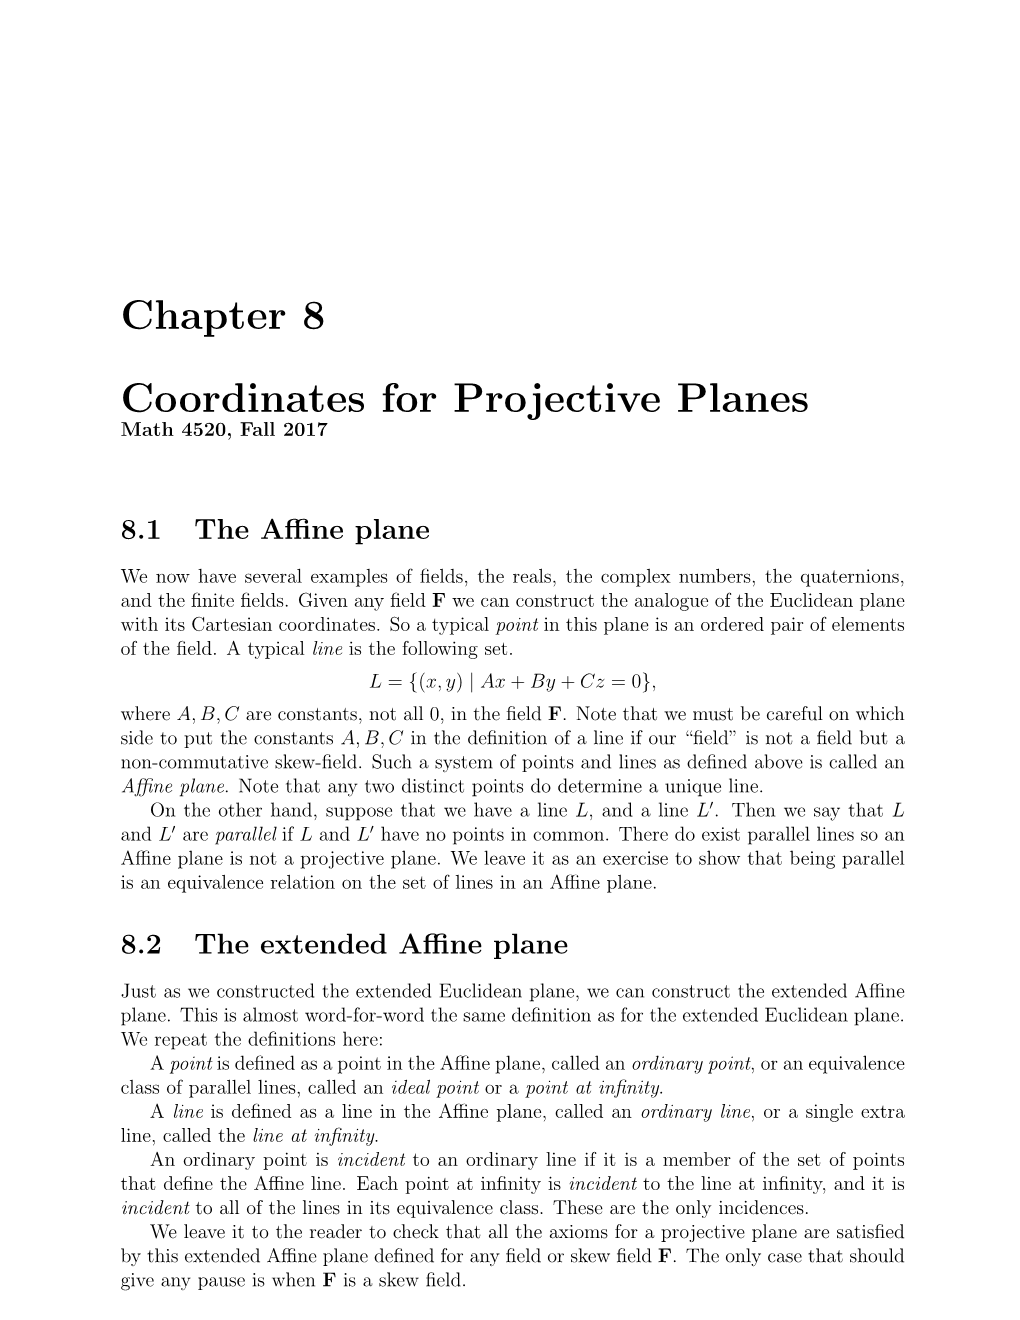 Chapter 8 Coordinates for Projective Planes